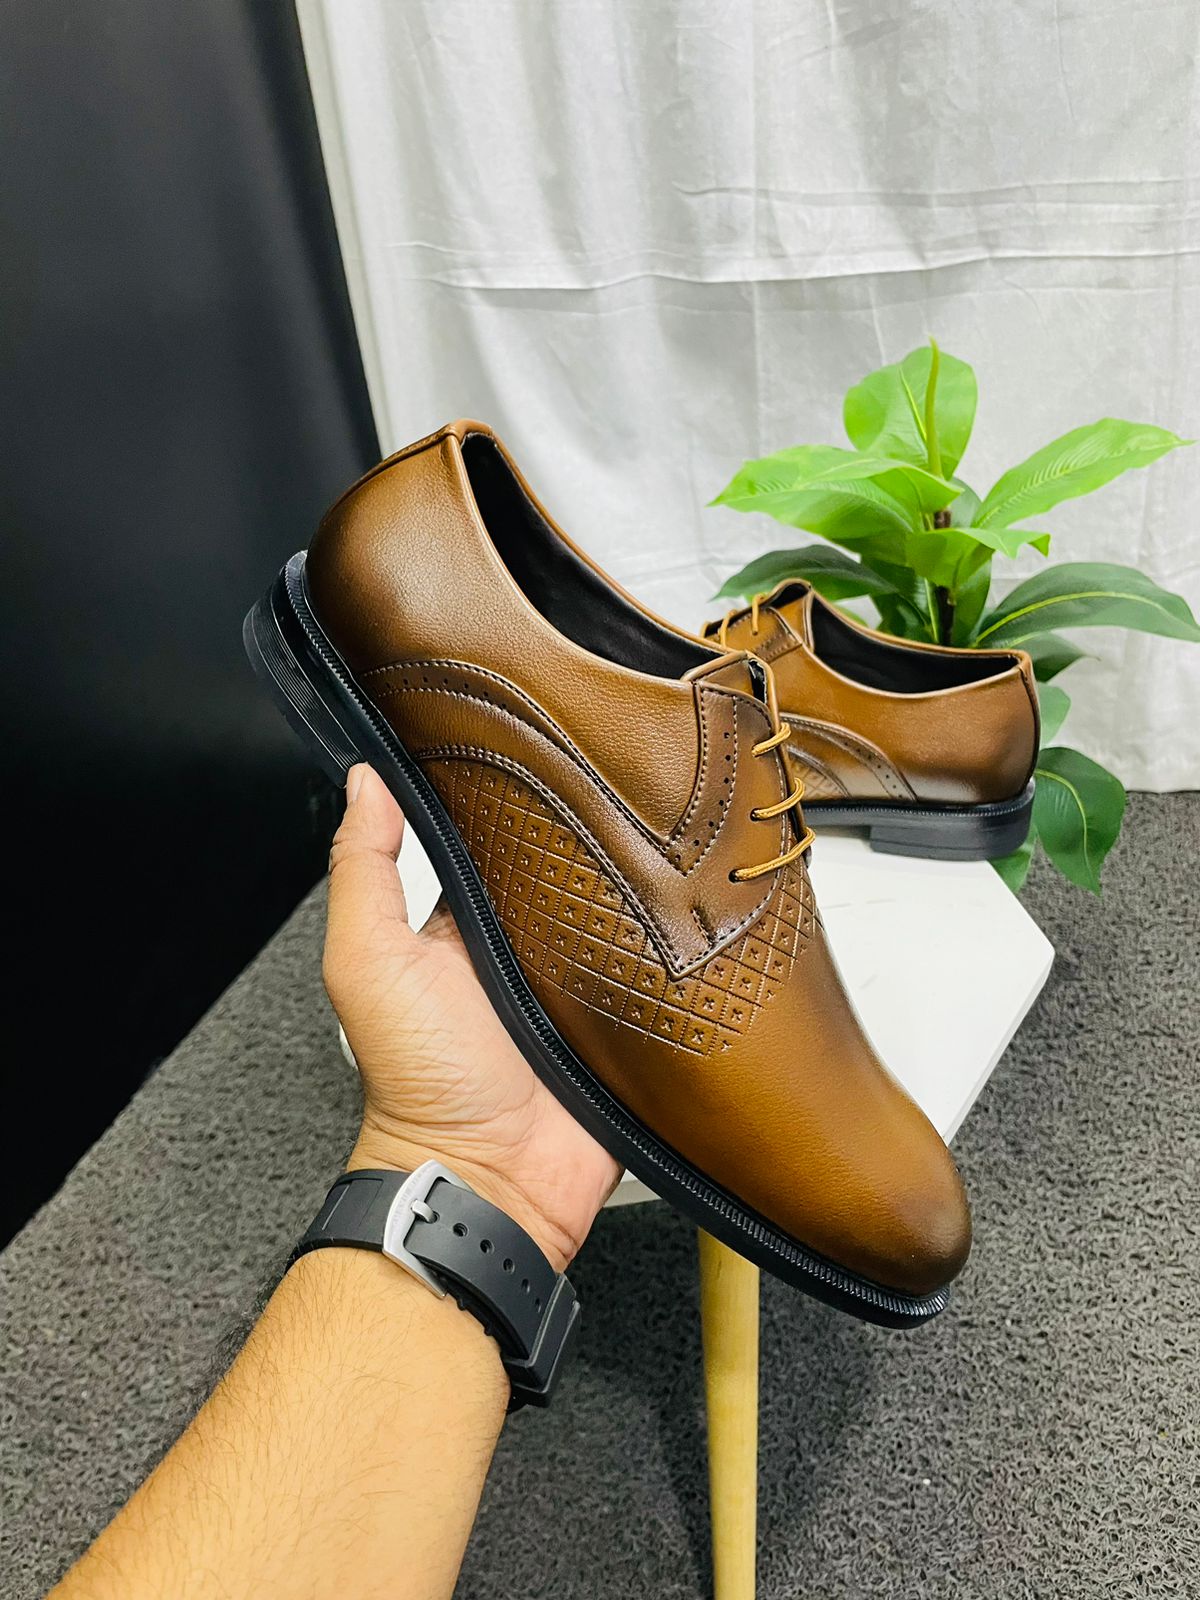 Men's Pu Leather Shoes Suitable For All Seasons